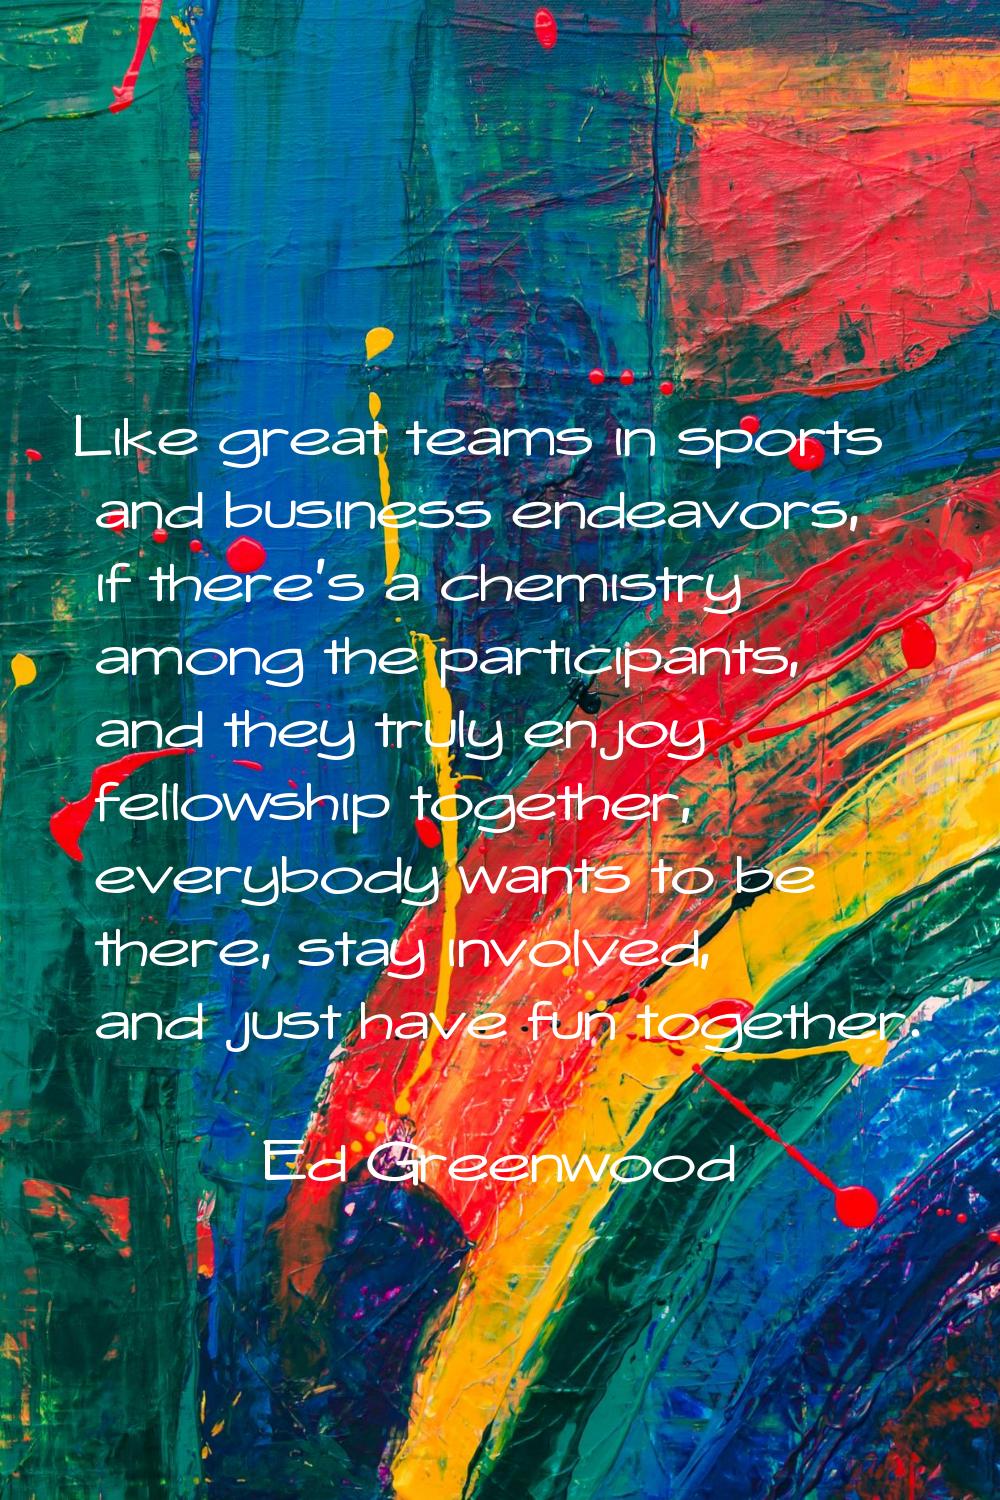 Like great teams in sports and business endeavors, if there's a chemistry among the participants, a